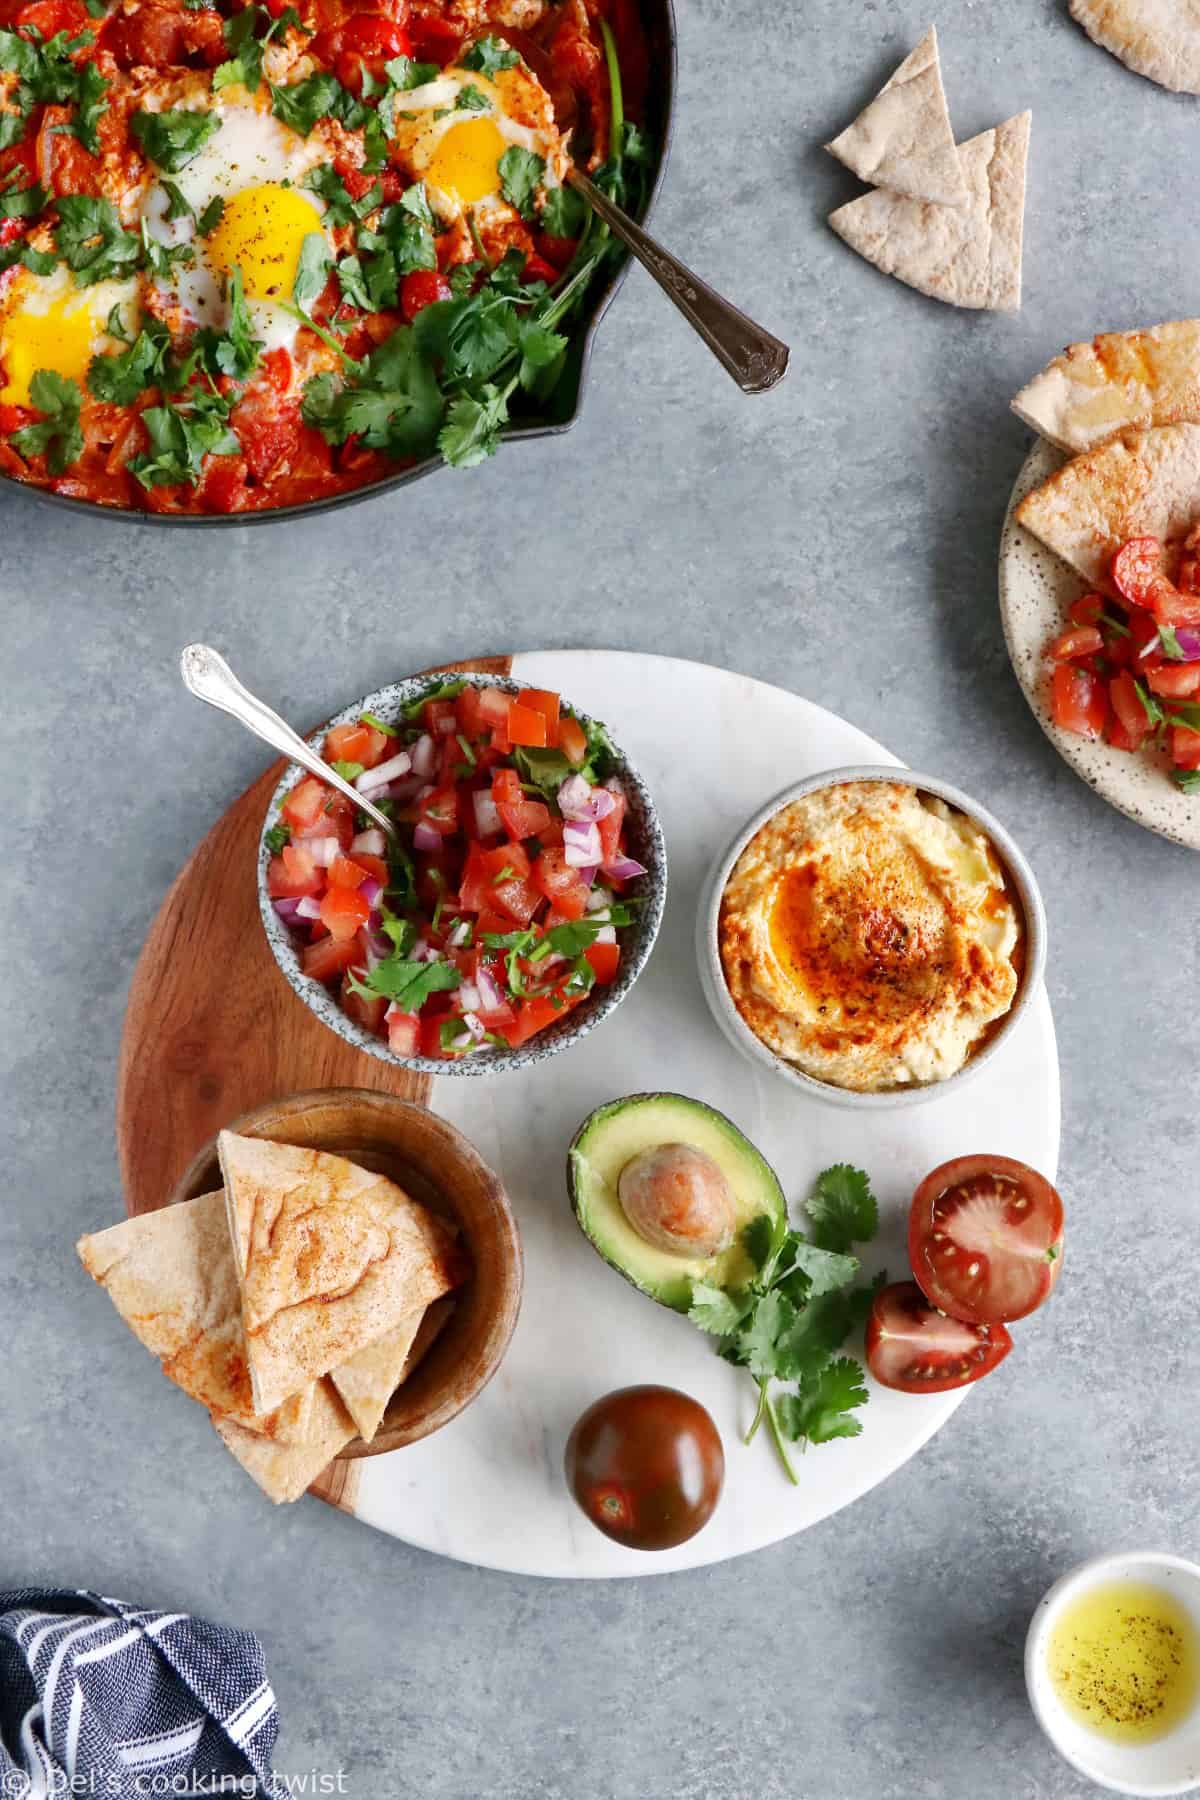 Ever wondered how to serve a shakshuka? Place it in the center of the table and serve with various small plates, breads and salads to make this meal a feast!